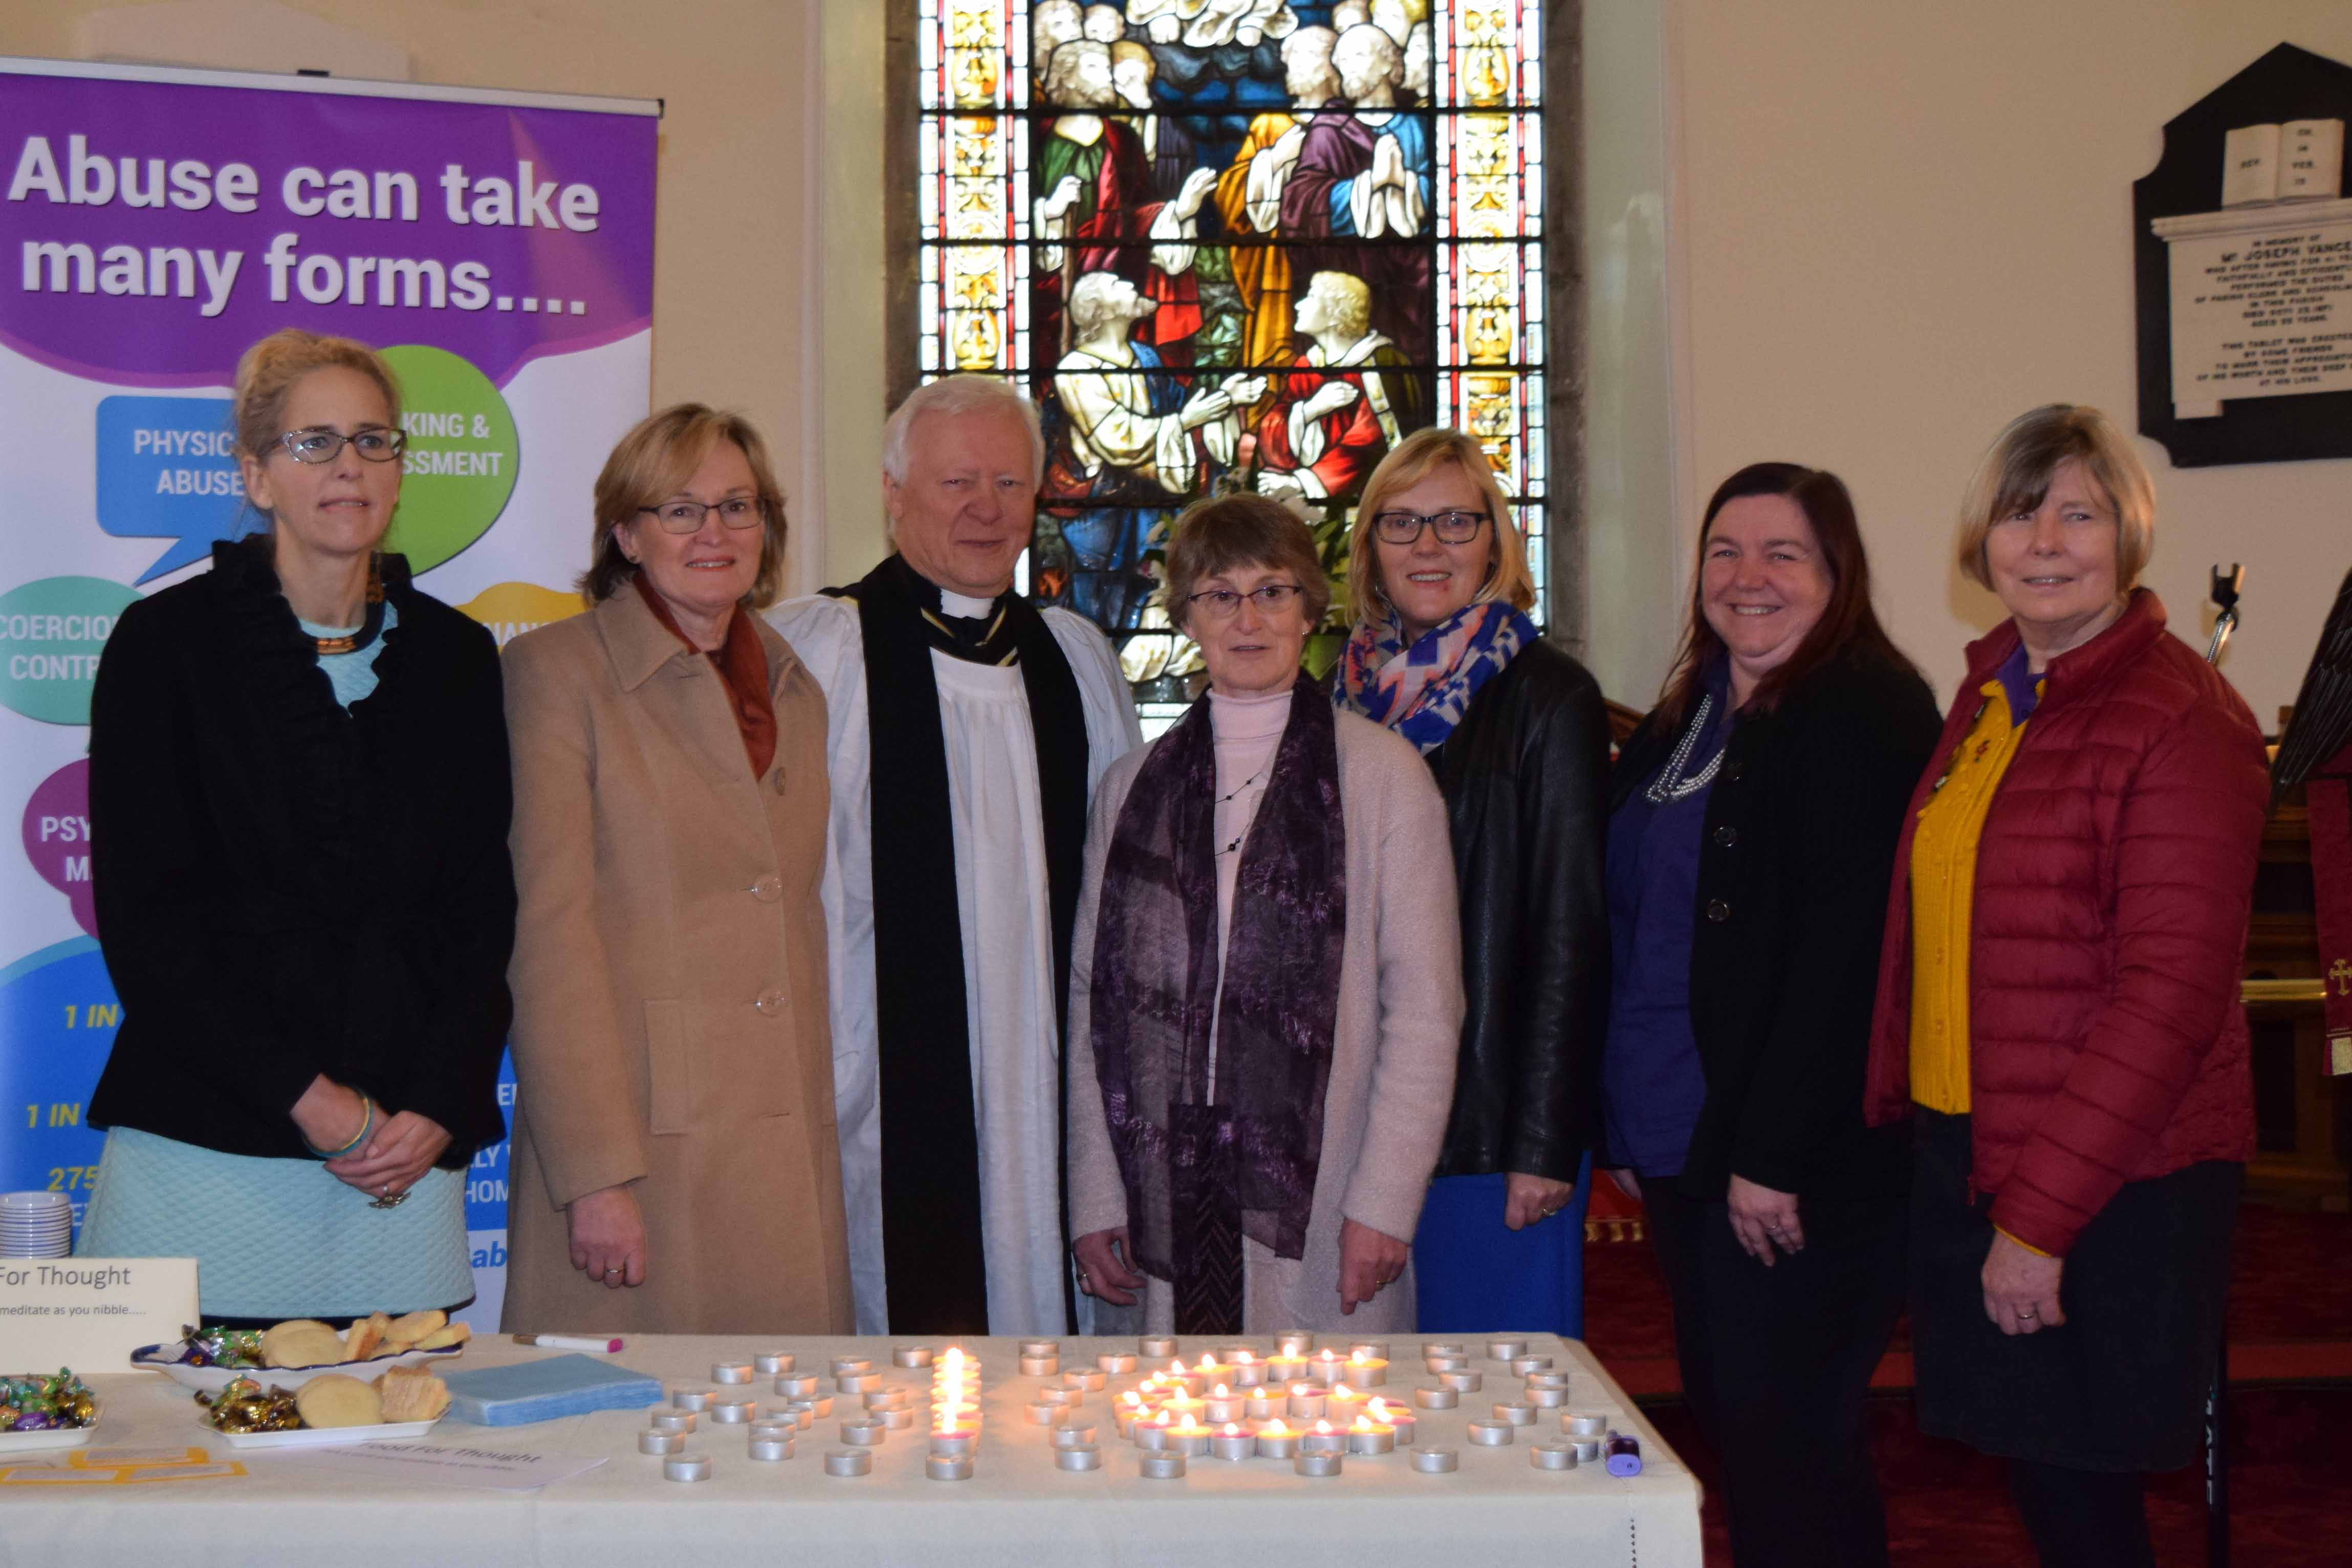 Mo Reynolds (Women's Link, Longford), Mairead McGuinness (MEP), Canon David Catterall, Martlet Hunter (Social Policy Rep), Hazel Speares (Diocesan President), Diane Steward (Longford MU) and Mary Geelan (Faith and Policy Co-ordinator).